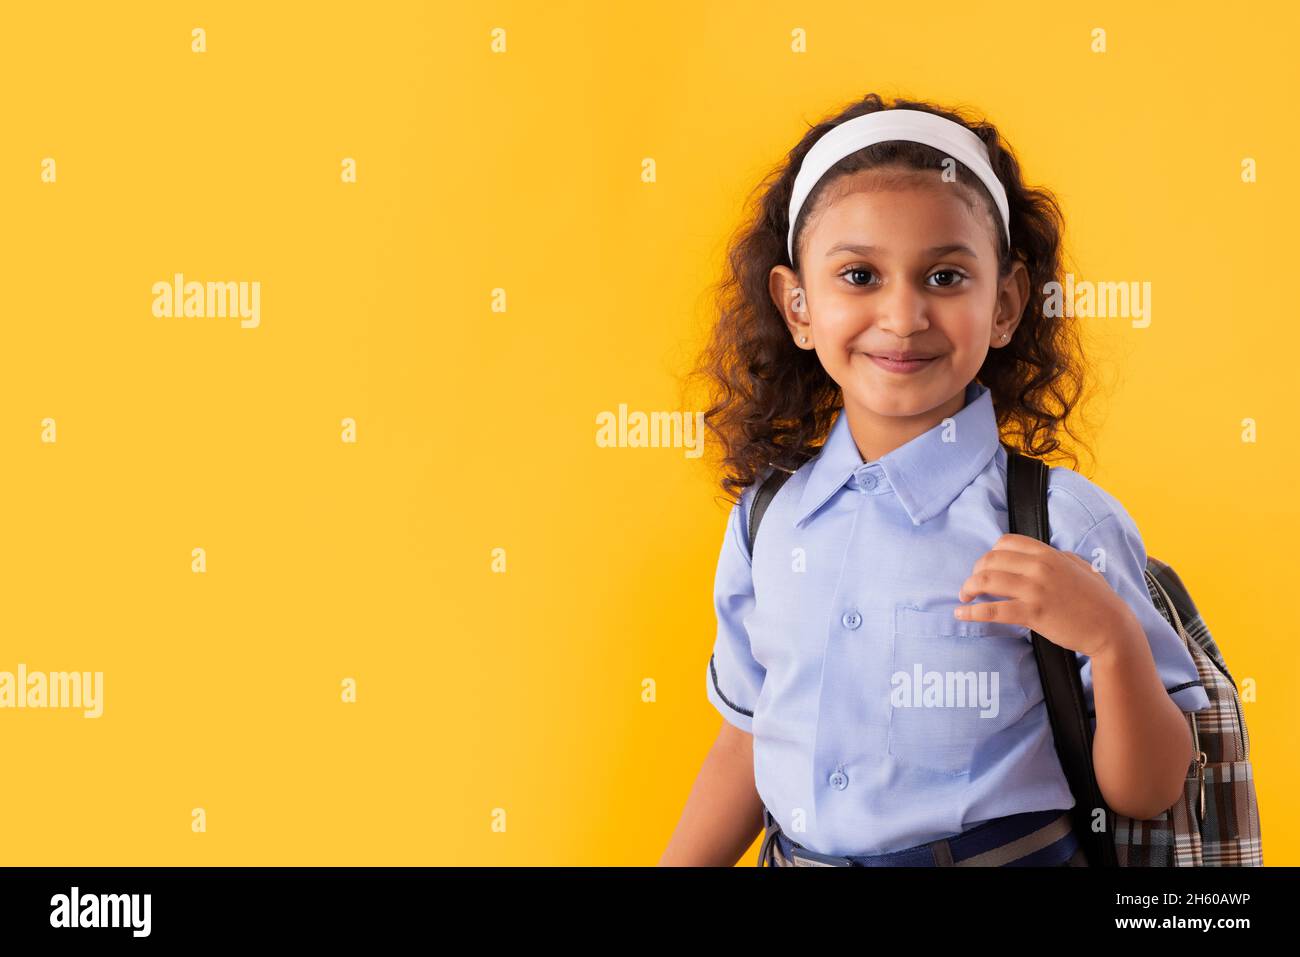 PORTRAIT OF A HAPPY GIRL IN SCHOOL UNIFORM LOOKING AT CAMERA Stock Photo